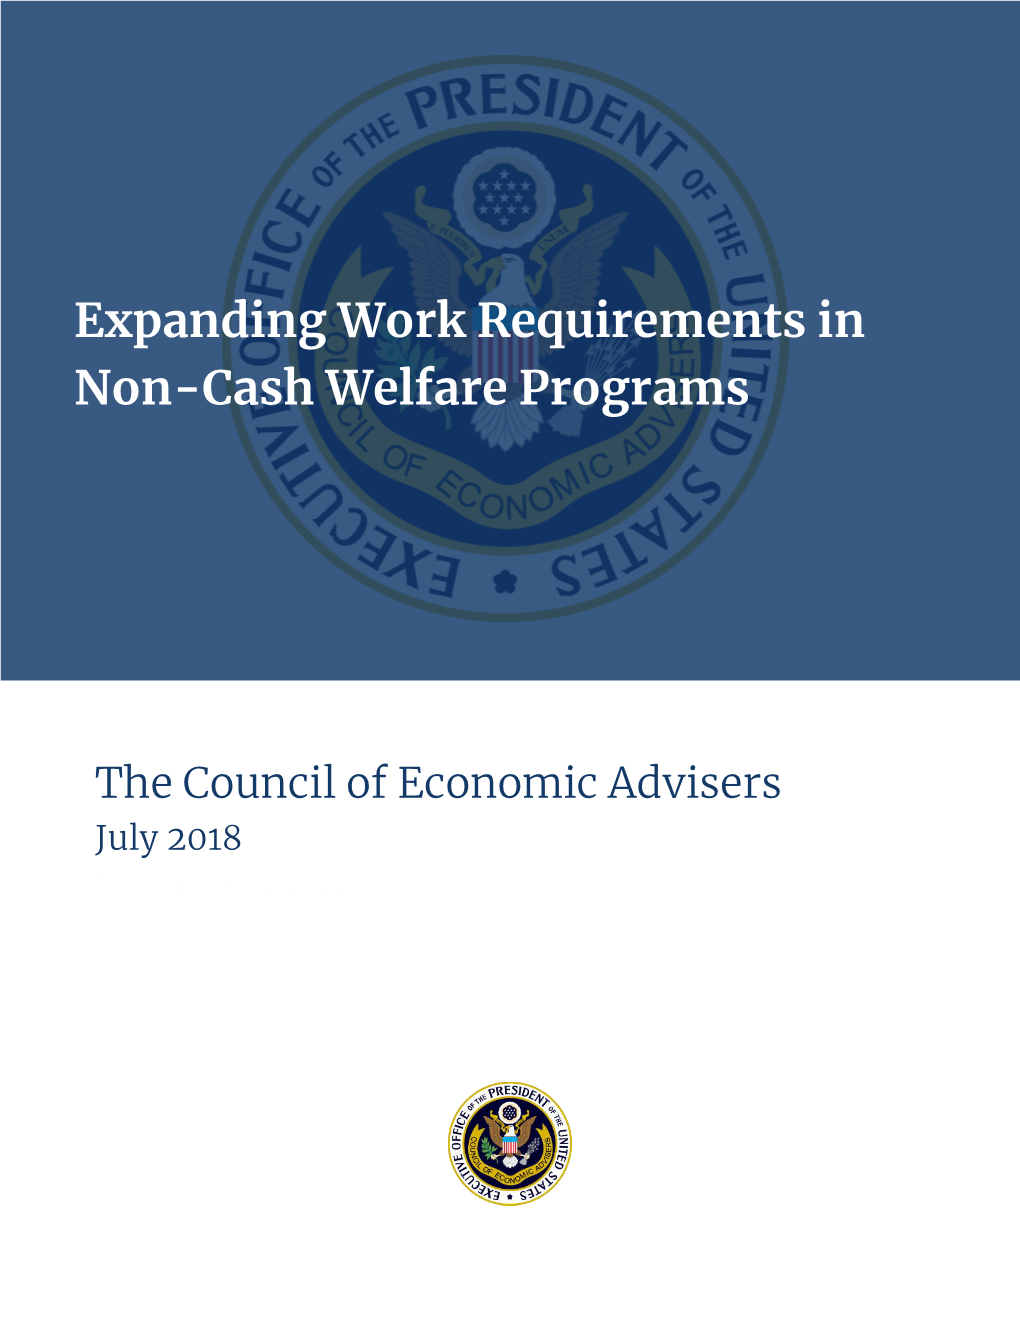 Expanding Work Requirements in Non-Cash Welfare Programs